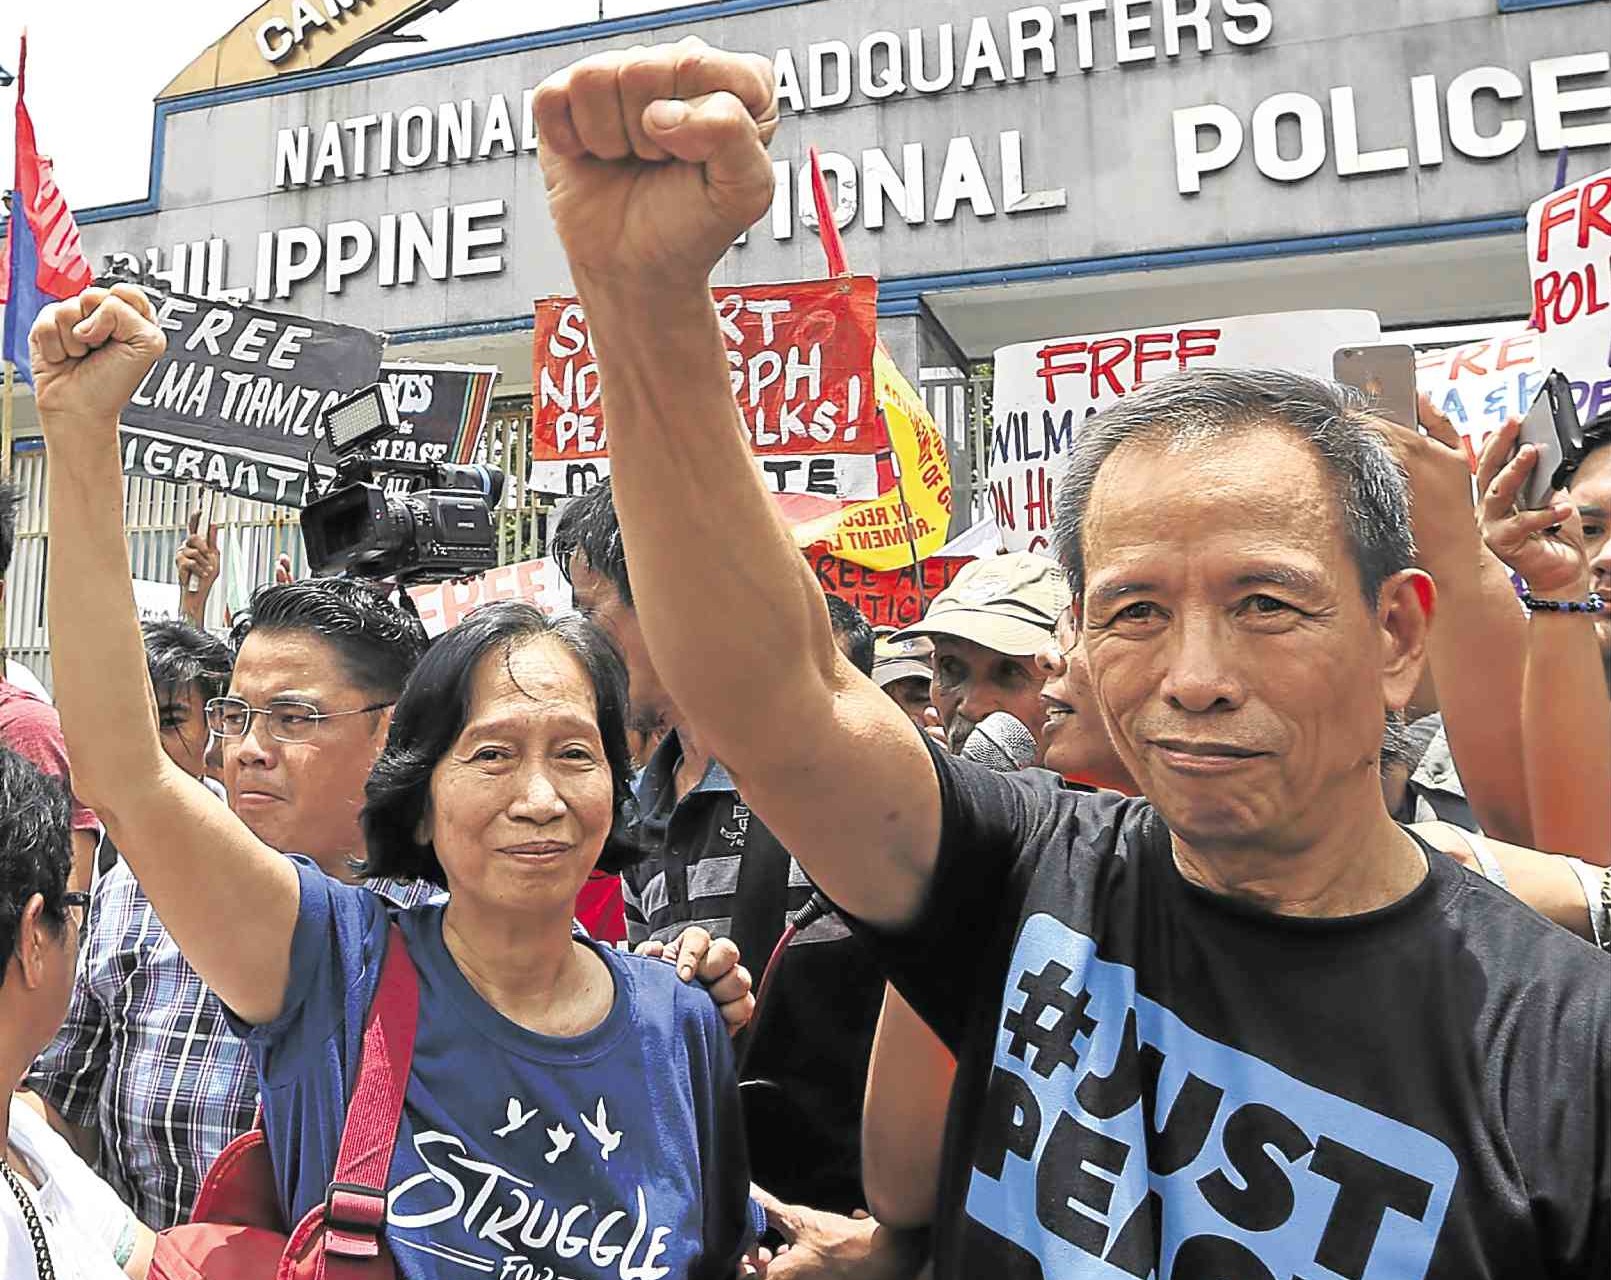 In this file photo, Communist Party of the Philippines leaders (right and left) Benito Tiamzon and his wife, Wilma, raise clenched fists as they walk out of police detention on August 19, 2016, to join rebel negotiators in peace talks in Norway. PHILIPPINE DAILY INQUIRER / NIÑO JESUS ORBETA